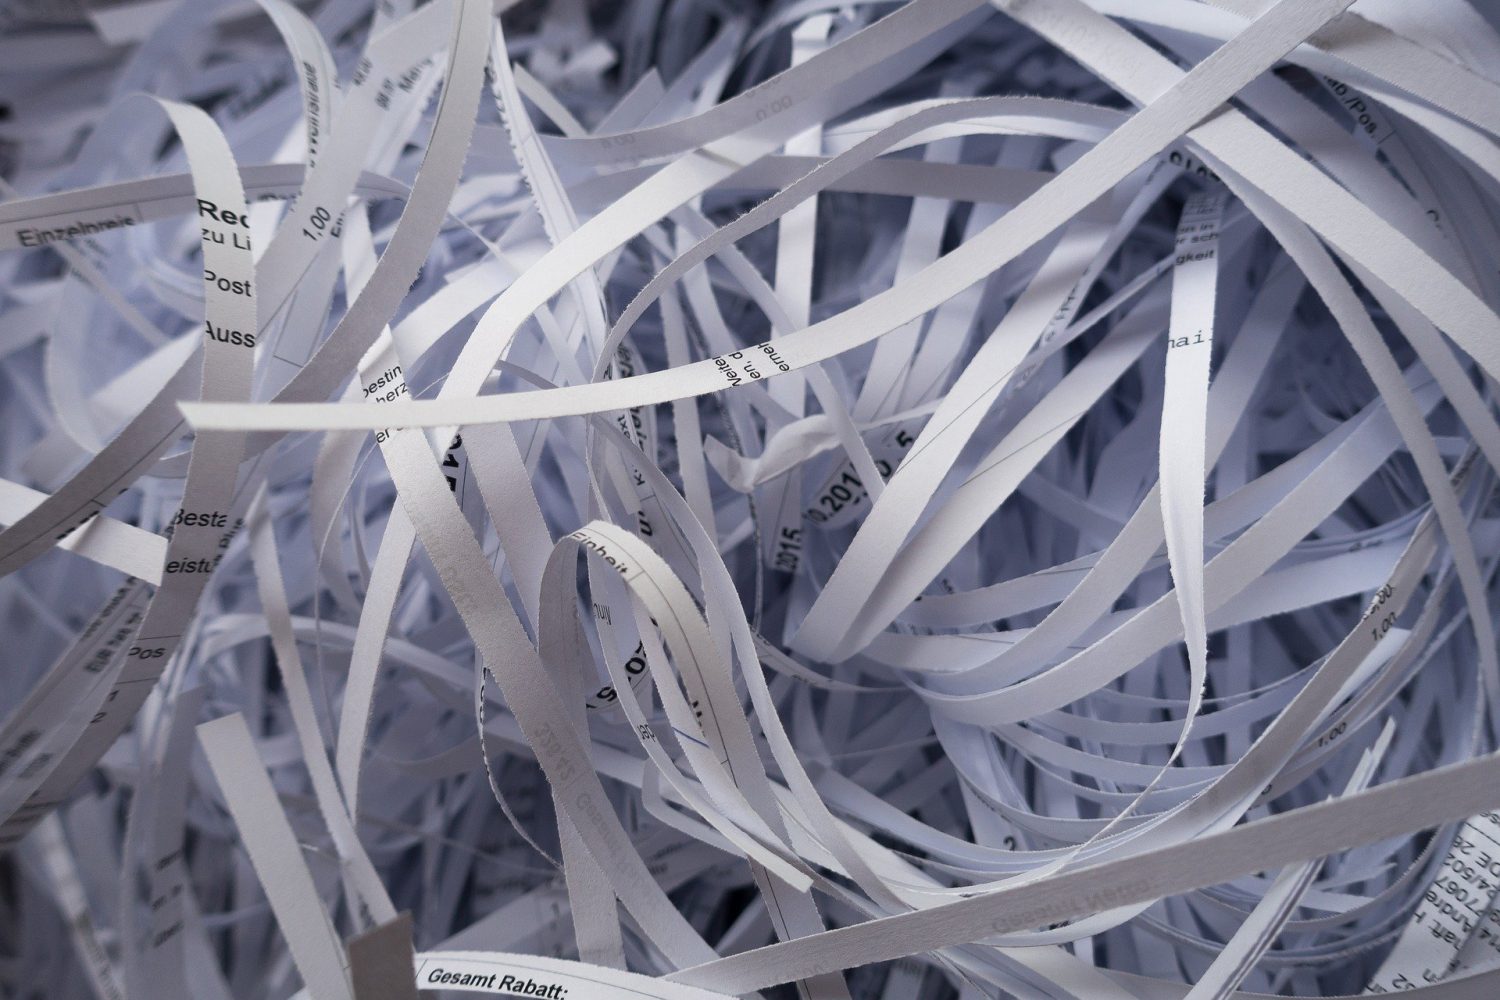 Crime Stoppers hosts shred day in Merrill